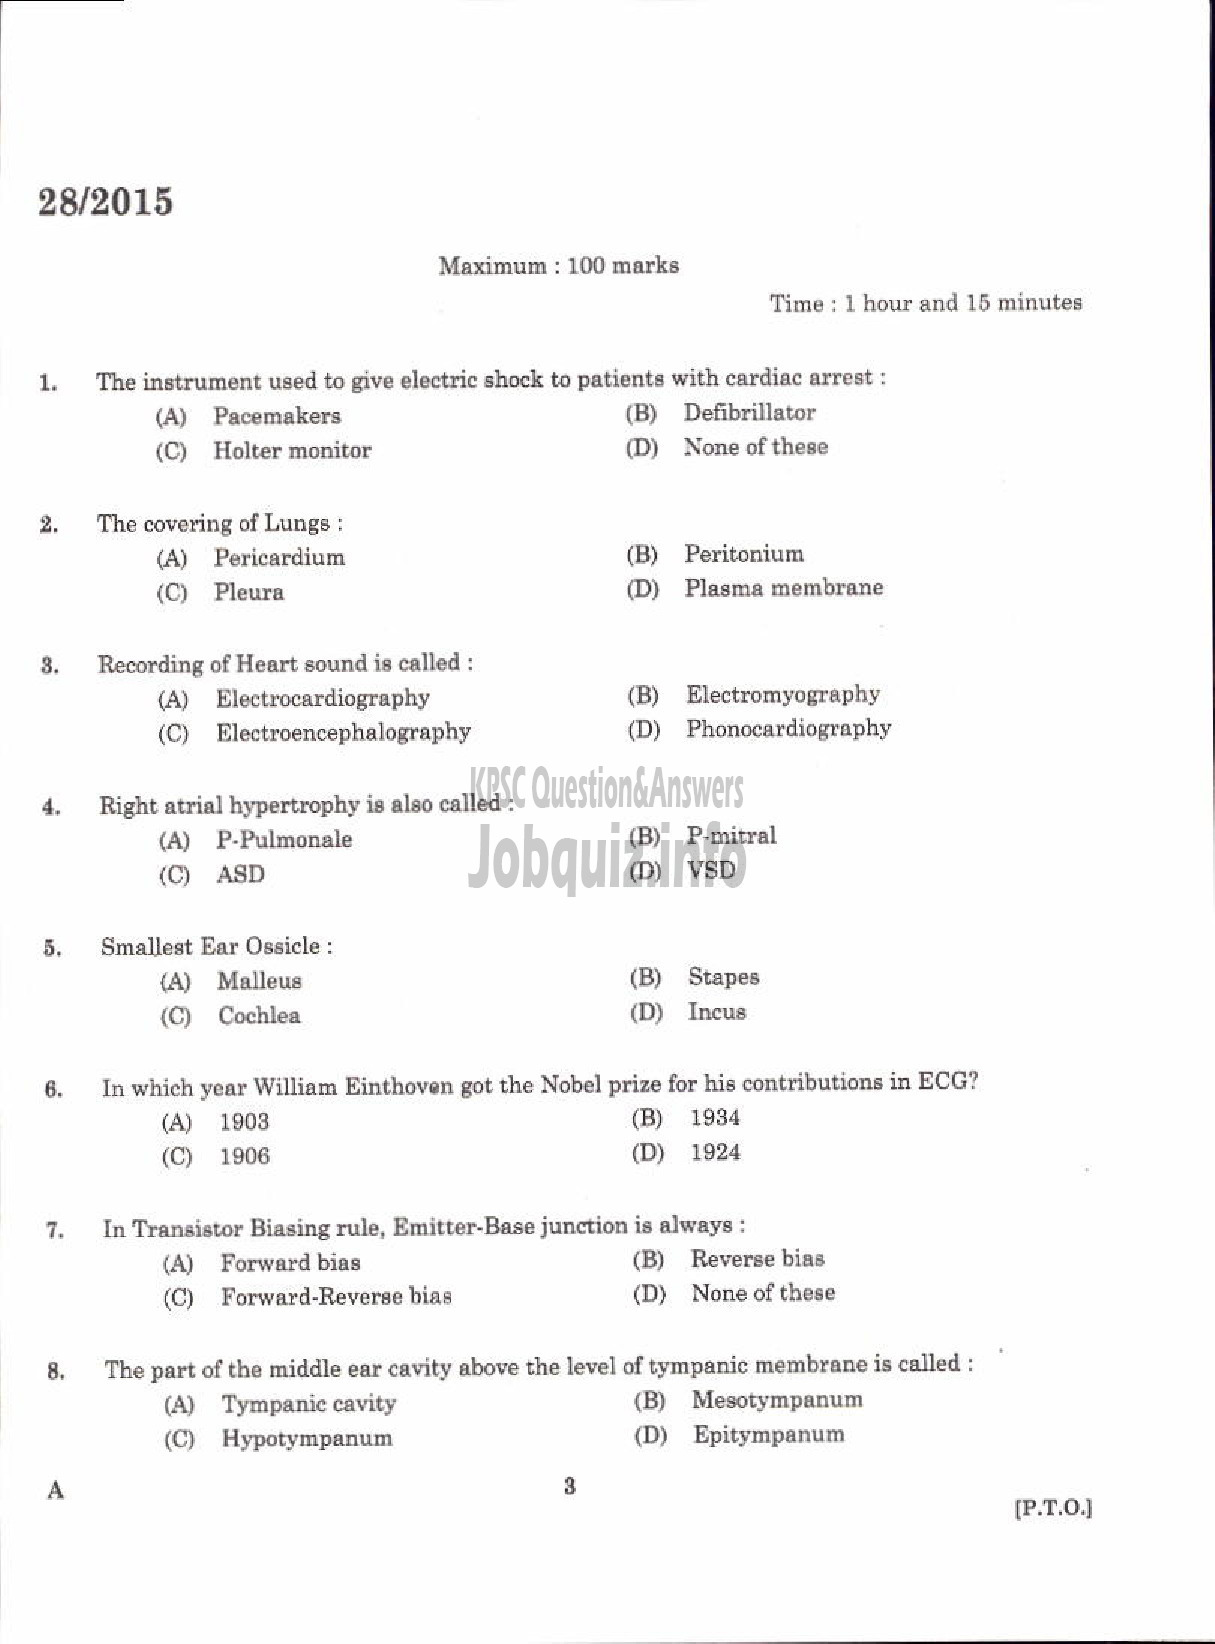 Kerala PSC Question Paper - LABORATORY TECHNICAL ASSISTANT ECG AND AUDIOMETRIC TECHNICIAN VHSE-1